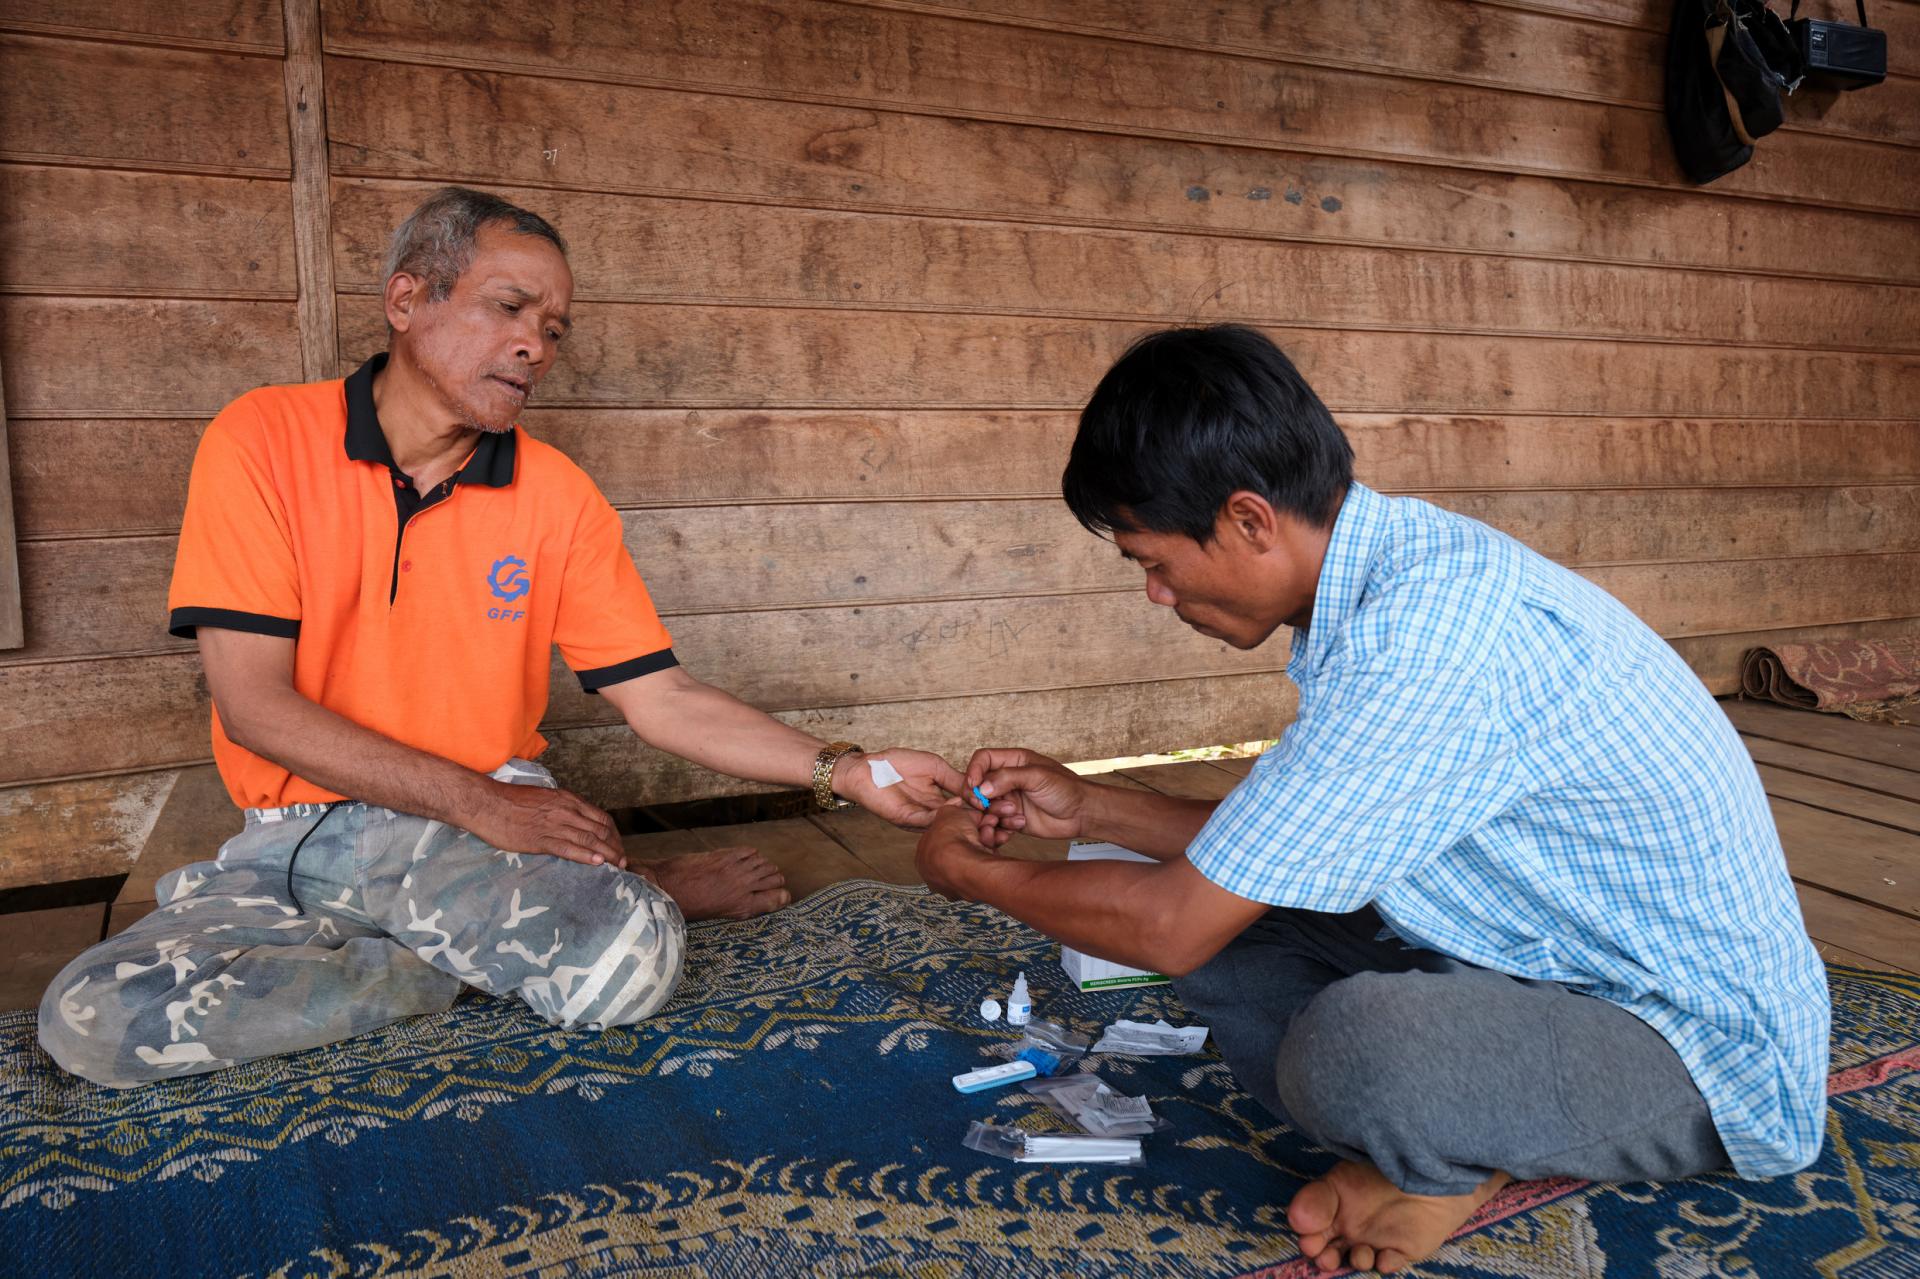 Village malaria worker Sisomphang testing a villager for malaria during a home visit. Photo: BART VERWEIJ